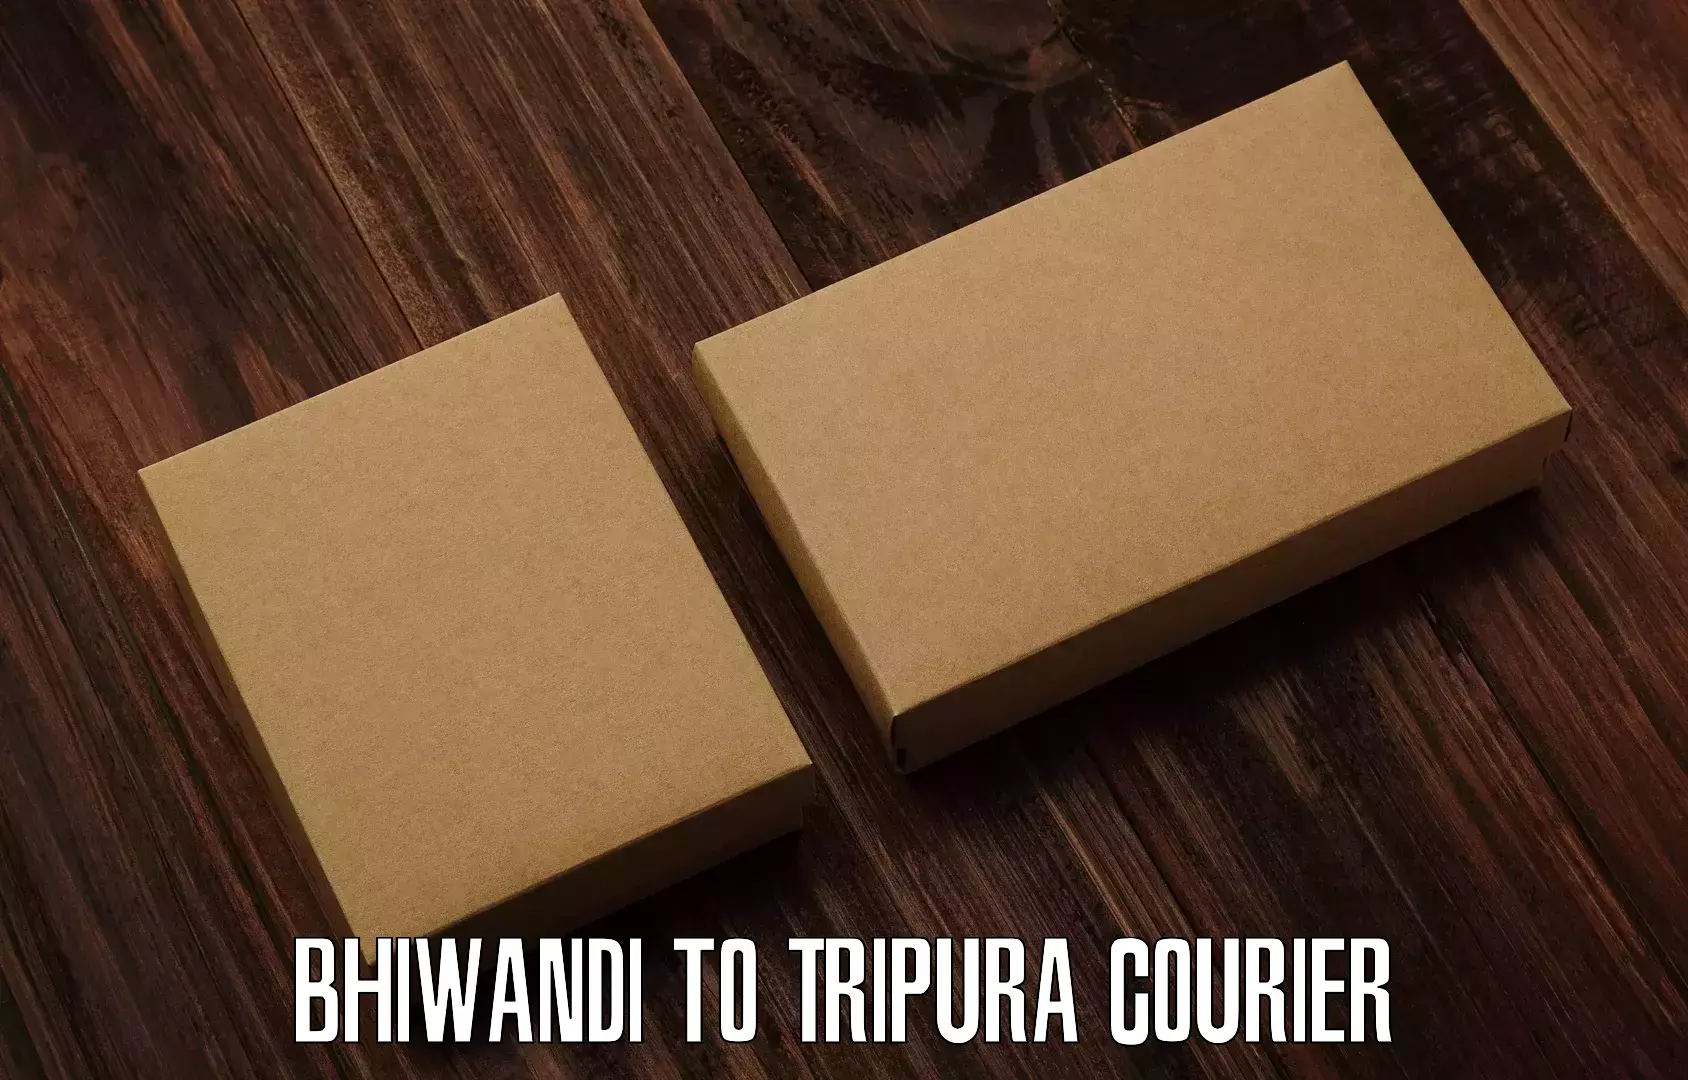 Business delivery service Bhiwandi to Dhalai